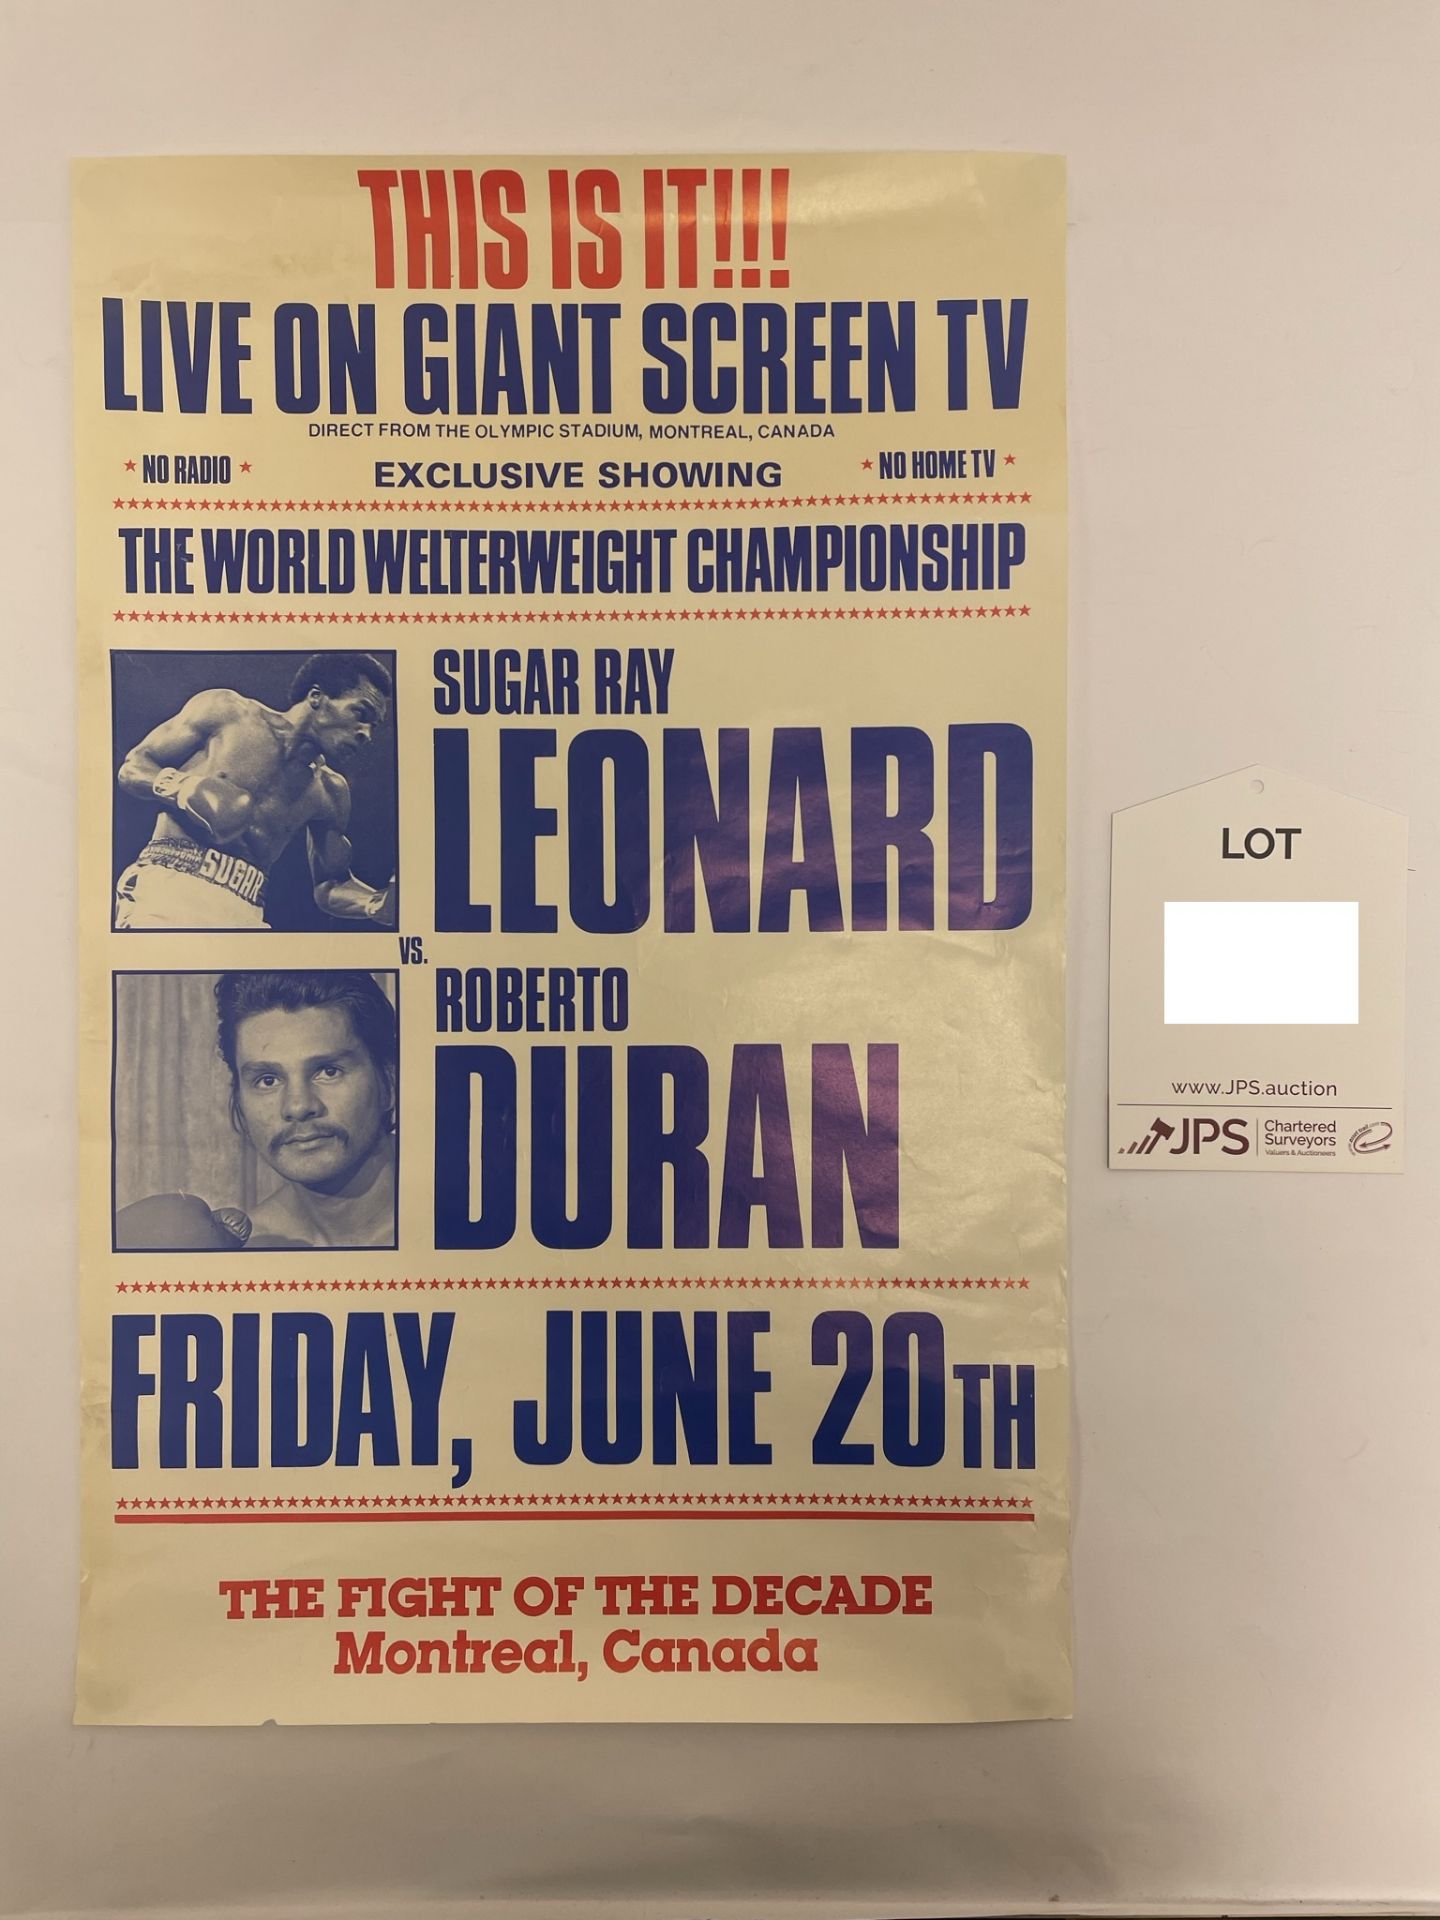 Sugar Ray Leonard vs Roberto Duran 'The Fight of the Decade' World Welterweight Fight Poster